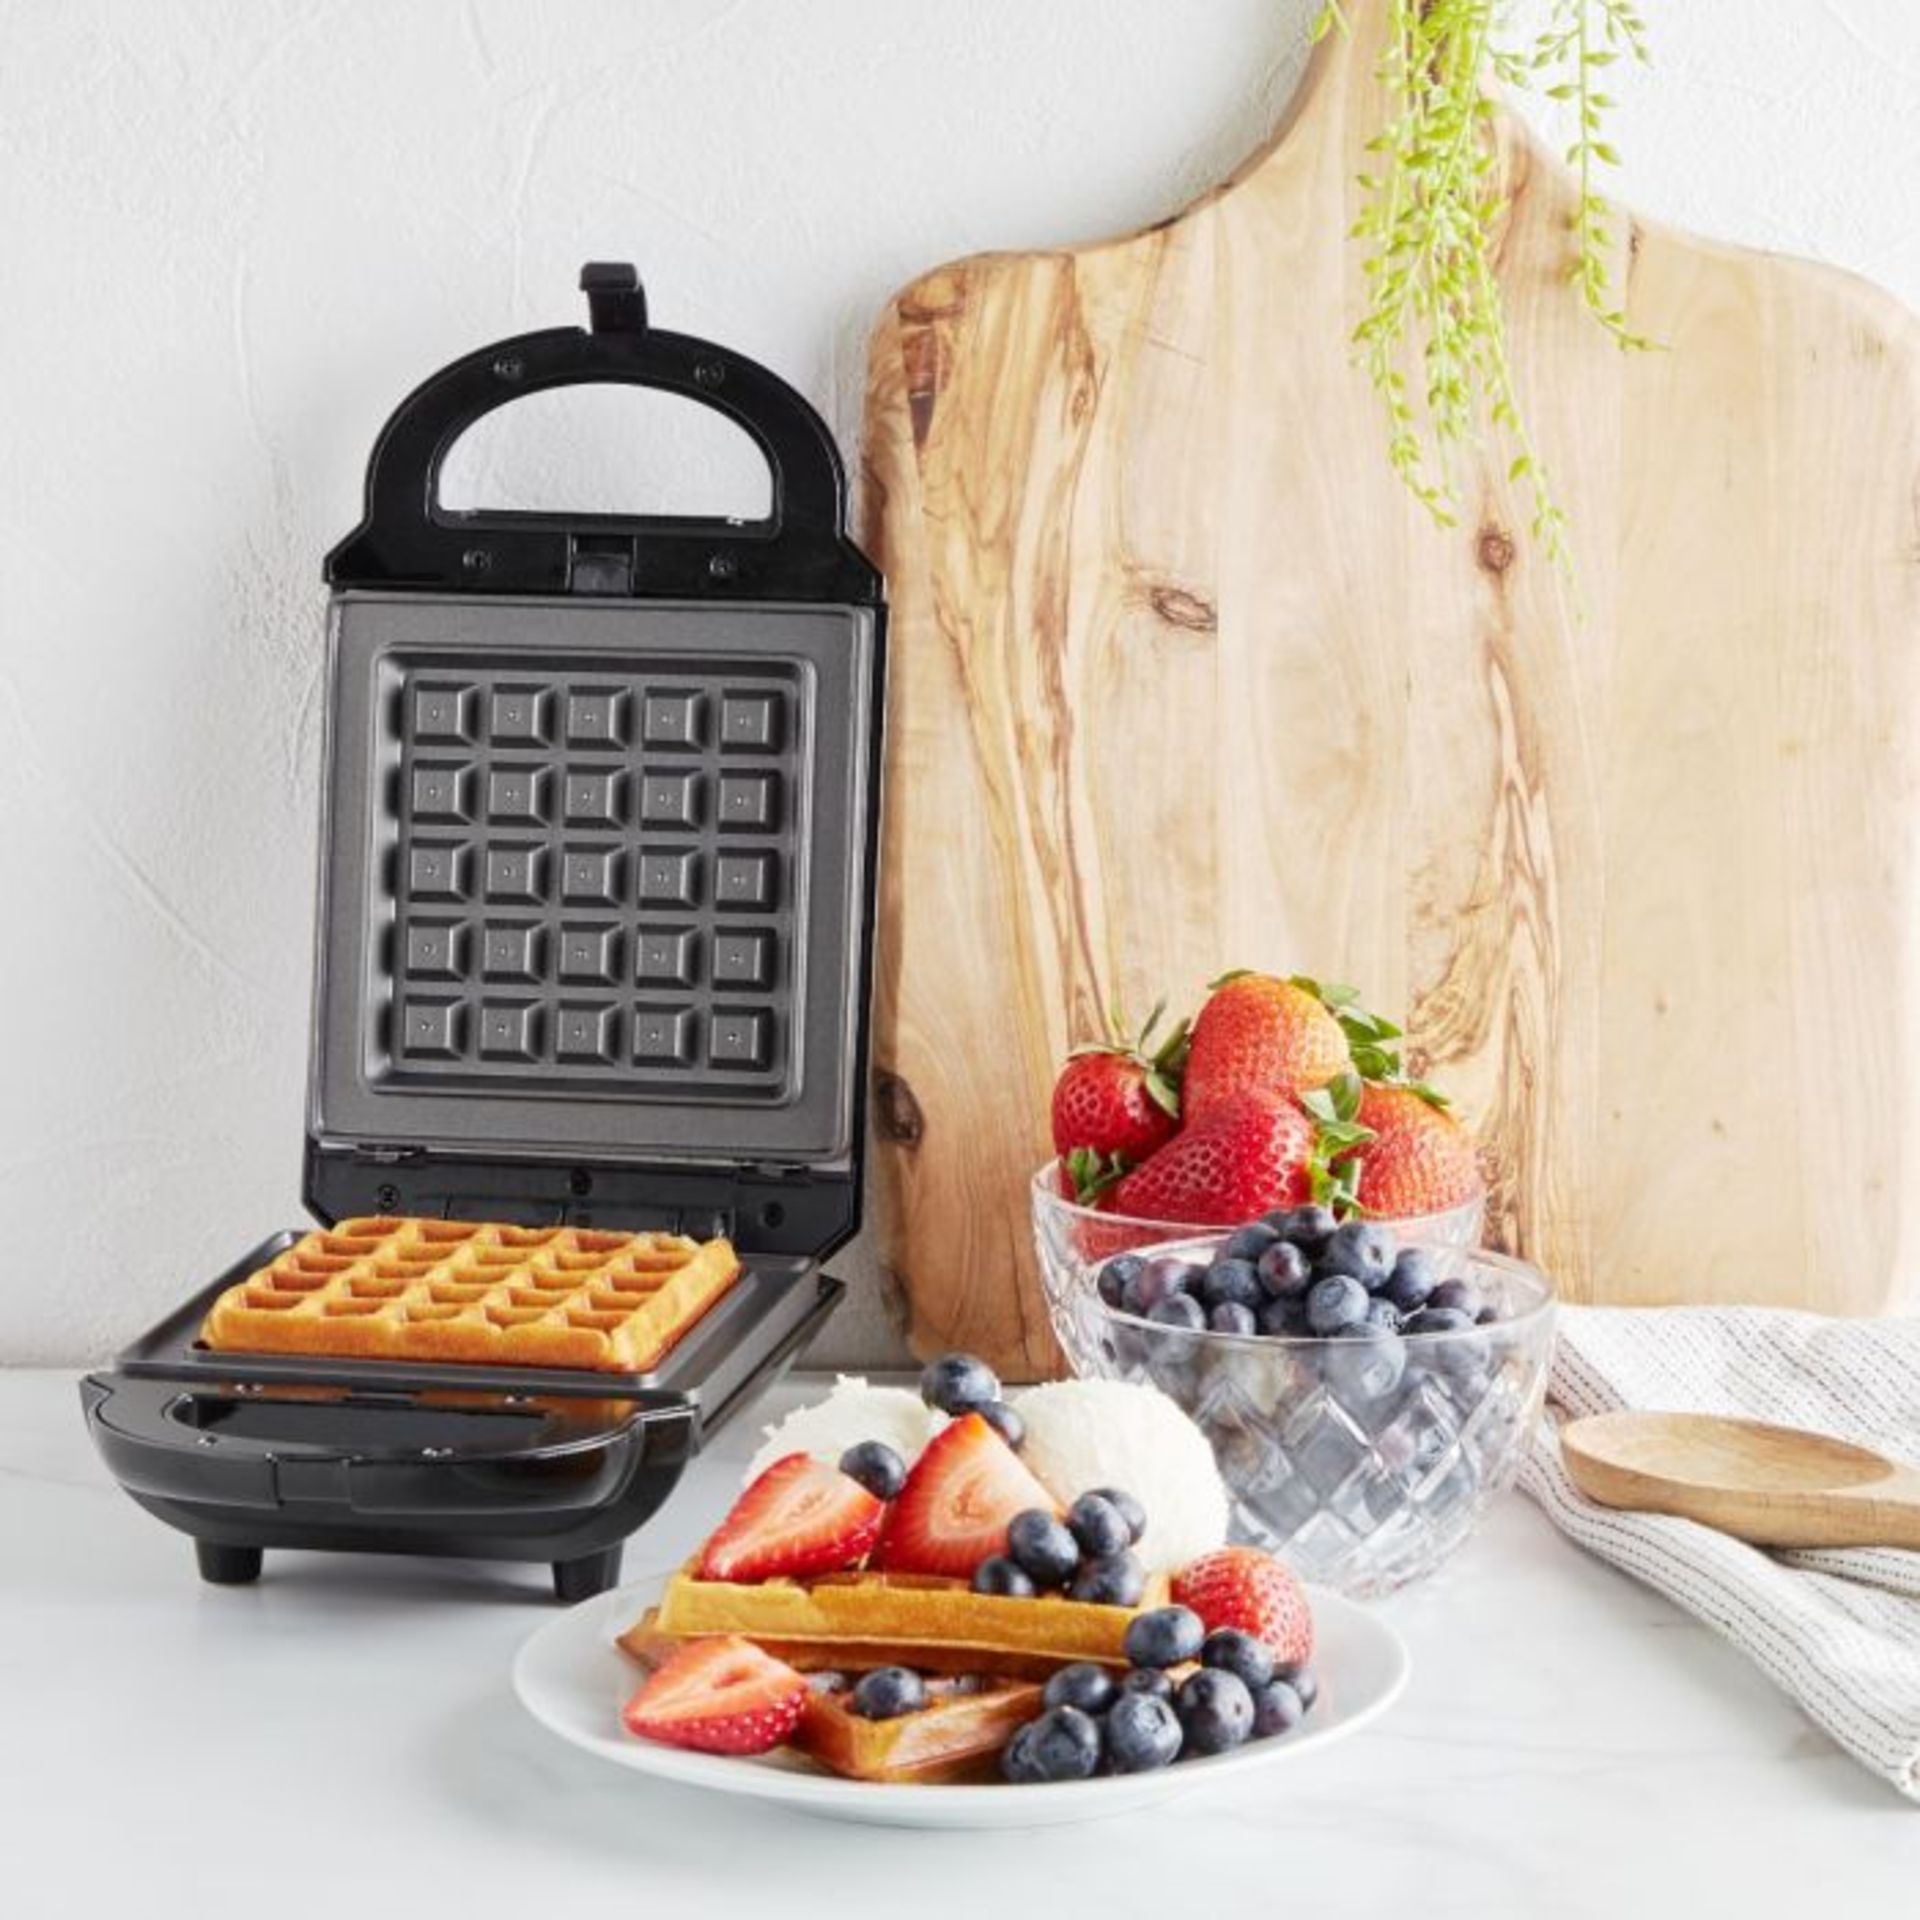 (S70) 460W 2 in 1 Snack Maker Make toasted sandwiches or waffles with this handy 2 in 1 snack ... - Image 3 of 5